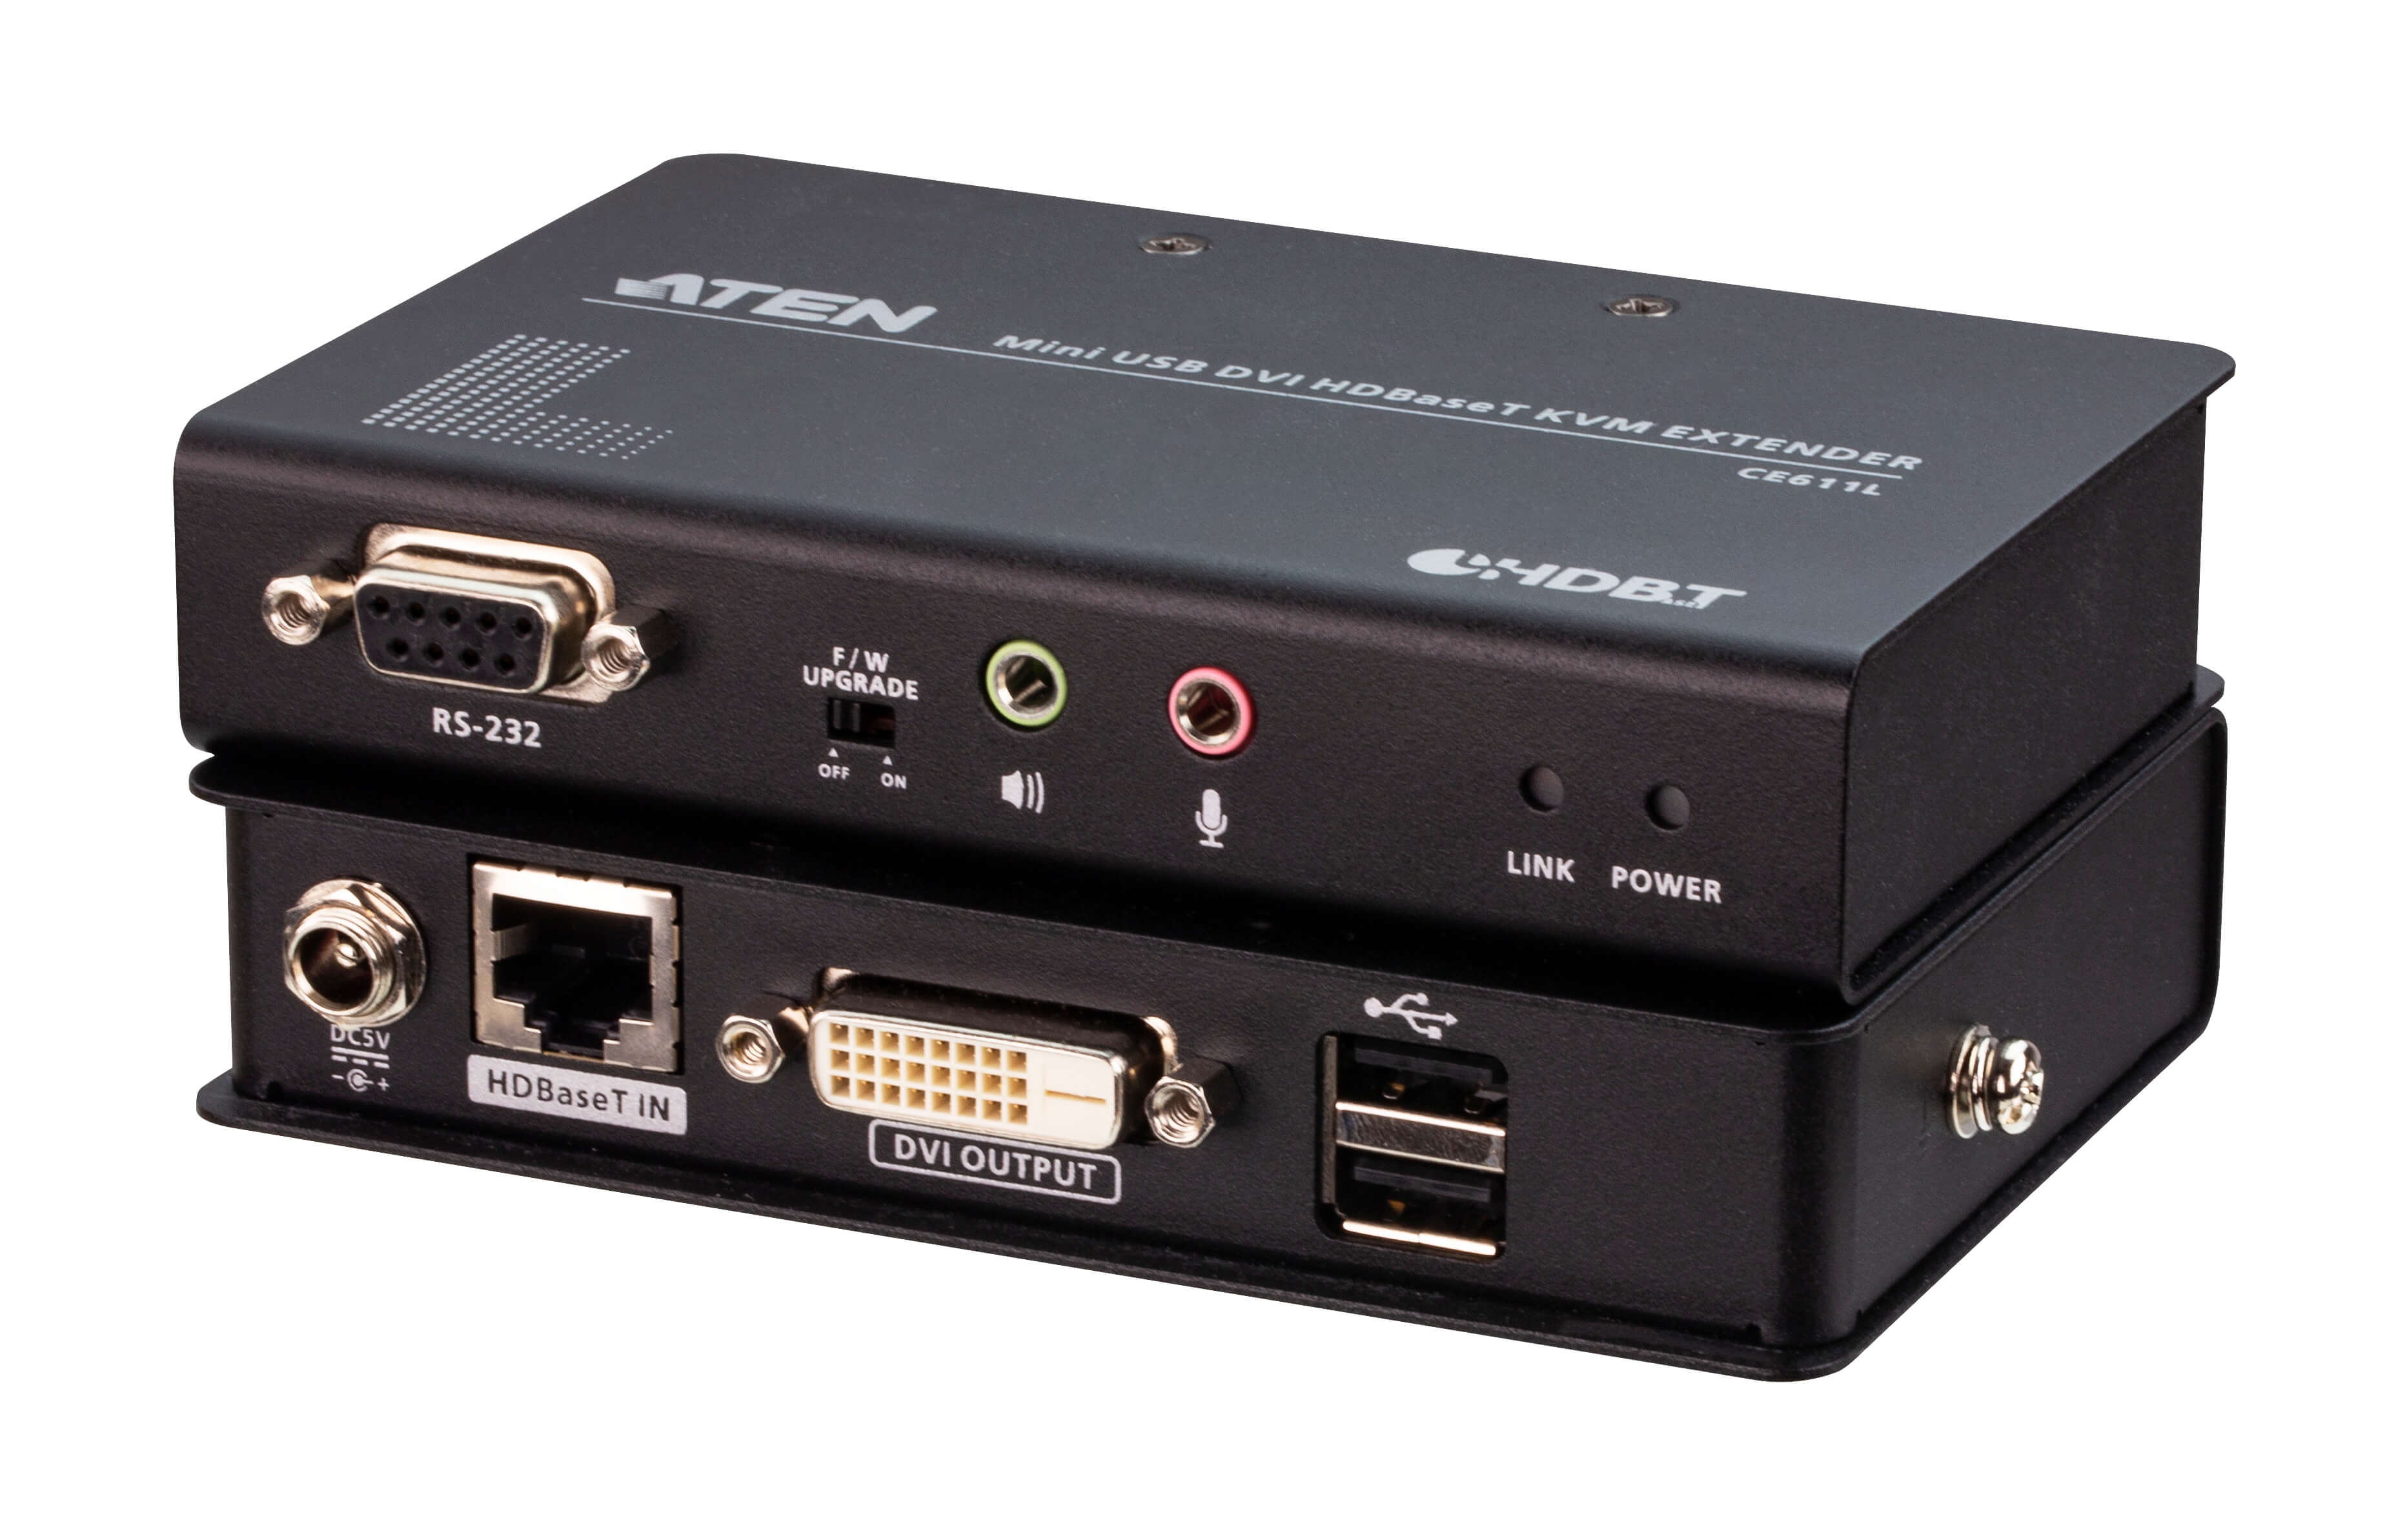 Aten DVI HDBaseT Mini KVM Extender, extends USB Keyboard and mouse with DVI video up to 1920 x 1200 @ 100m (Cat 6a), 2 USB 2.0 ports,